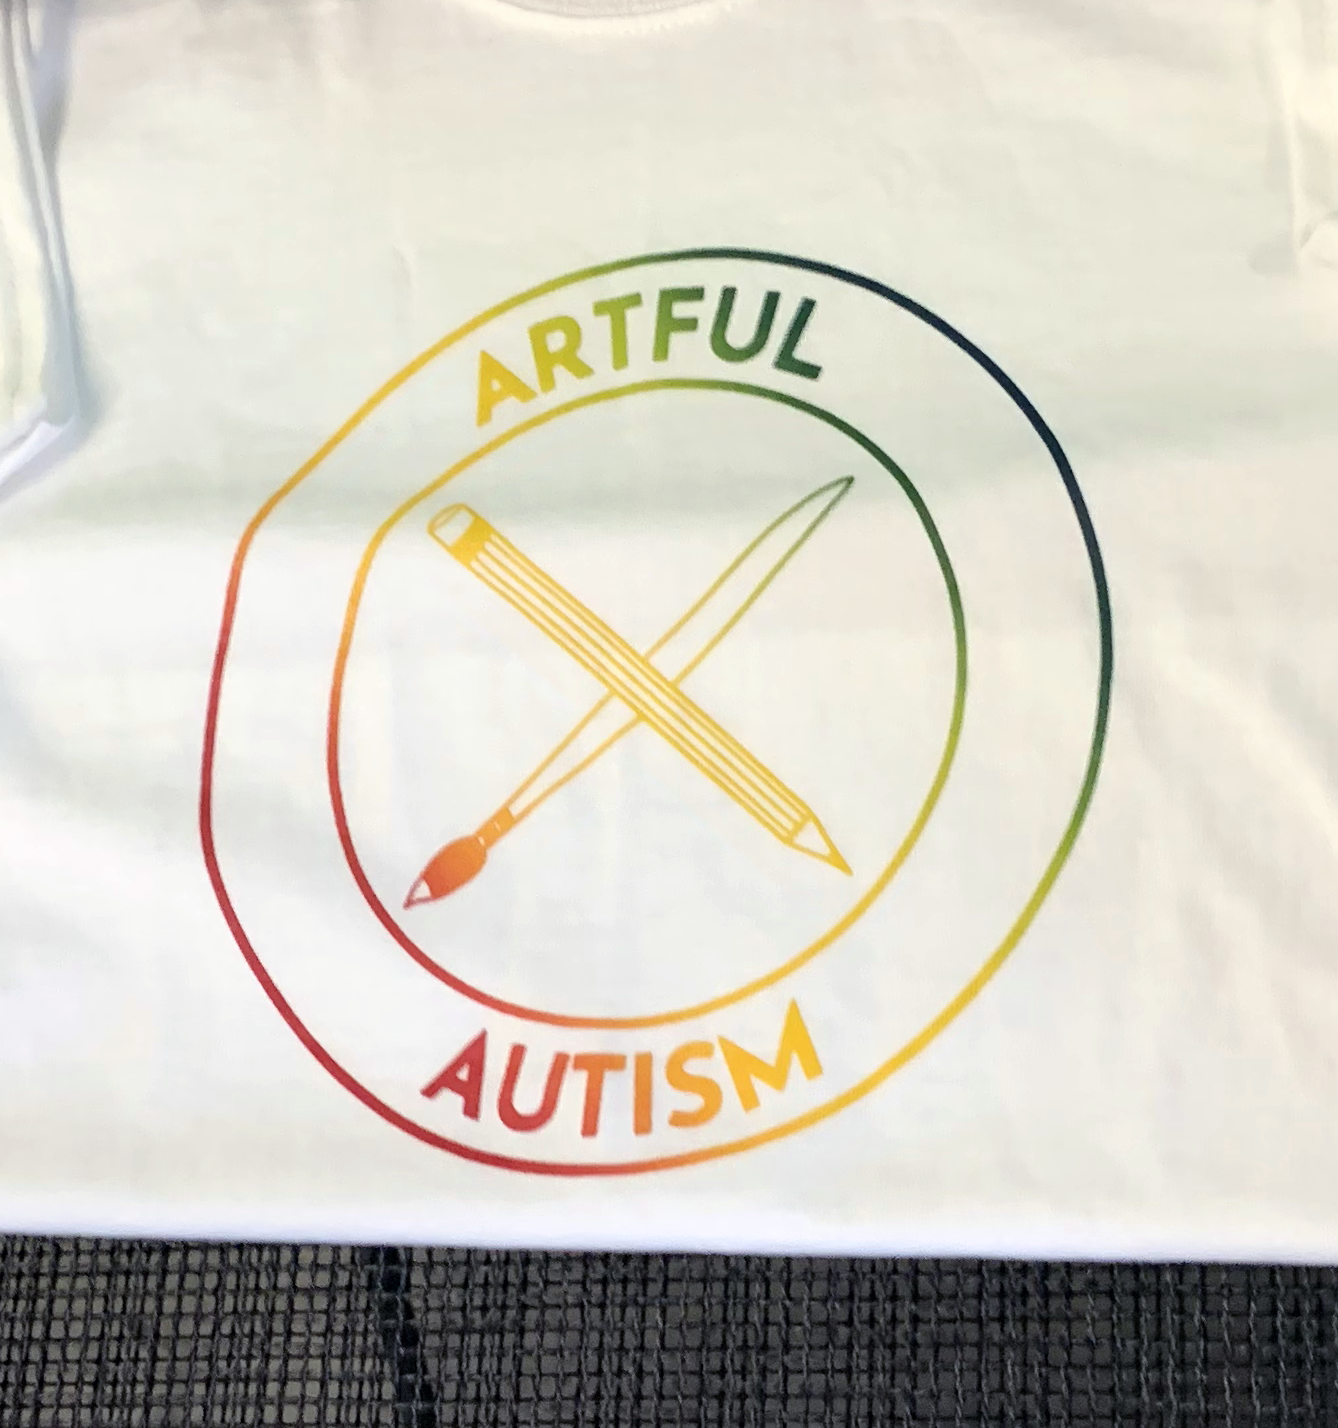 Screen printed logo: Artful Autism done in a rainbow gradient